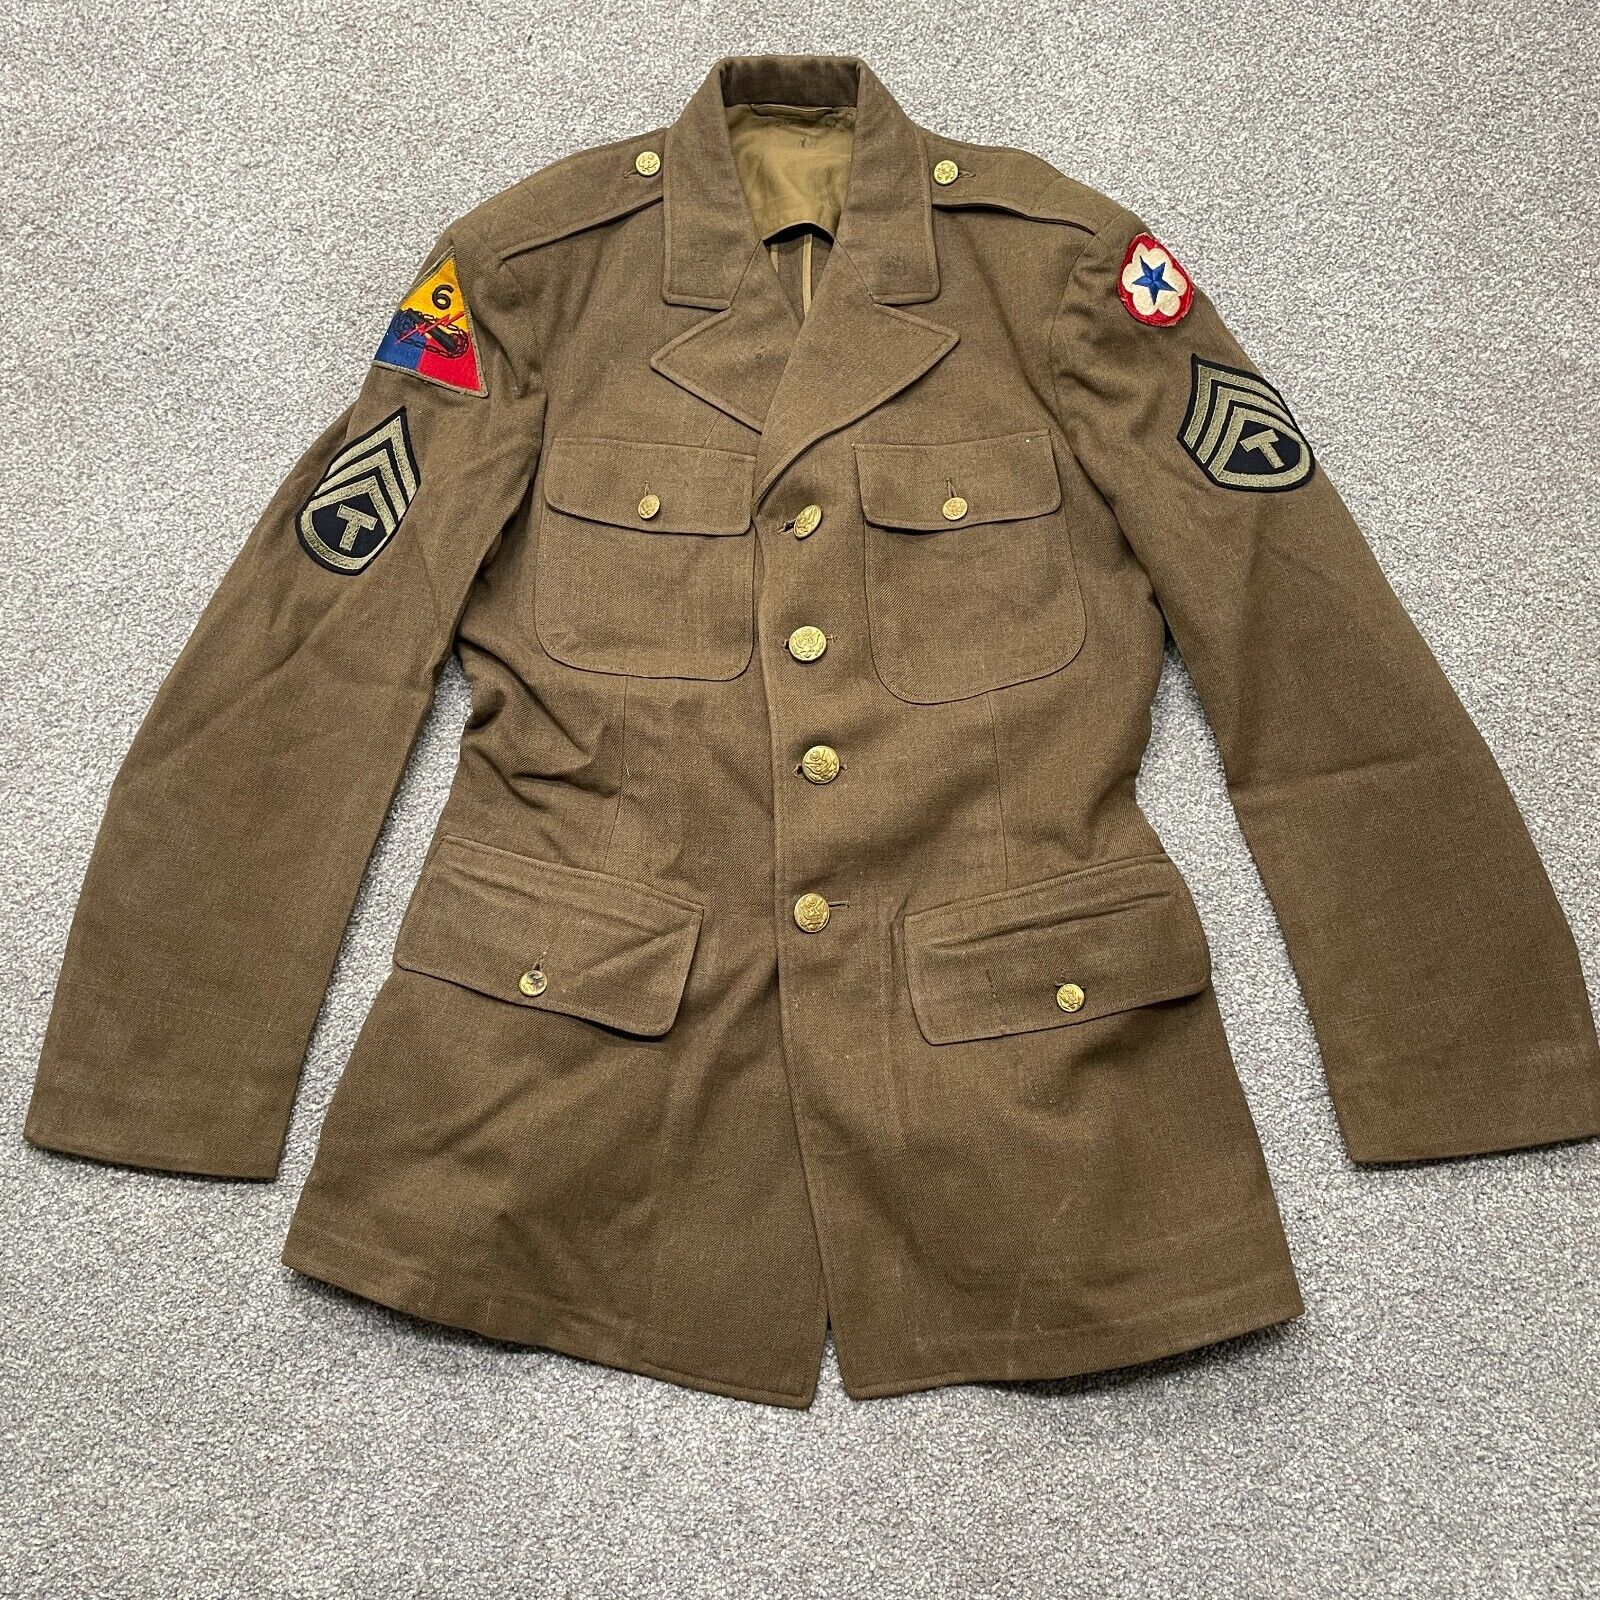 VTG WWII Jacket Size 37 6th Armored Division Super Sixth Staff Support 1941 WW2